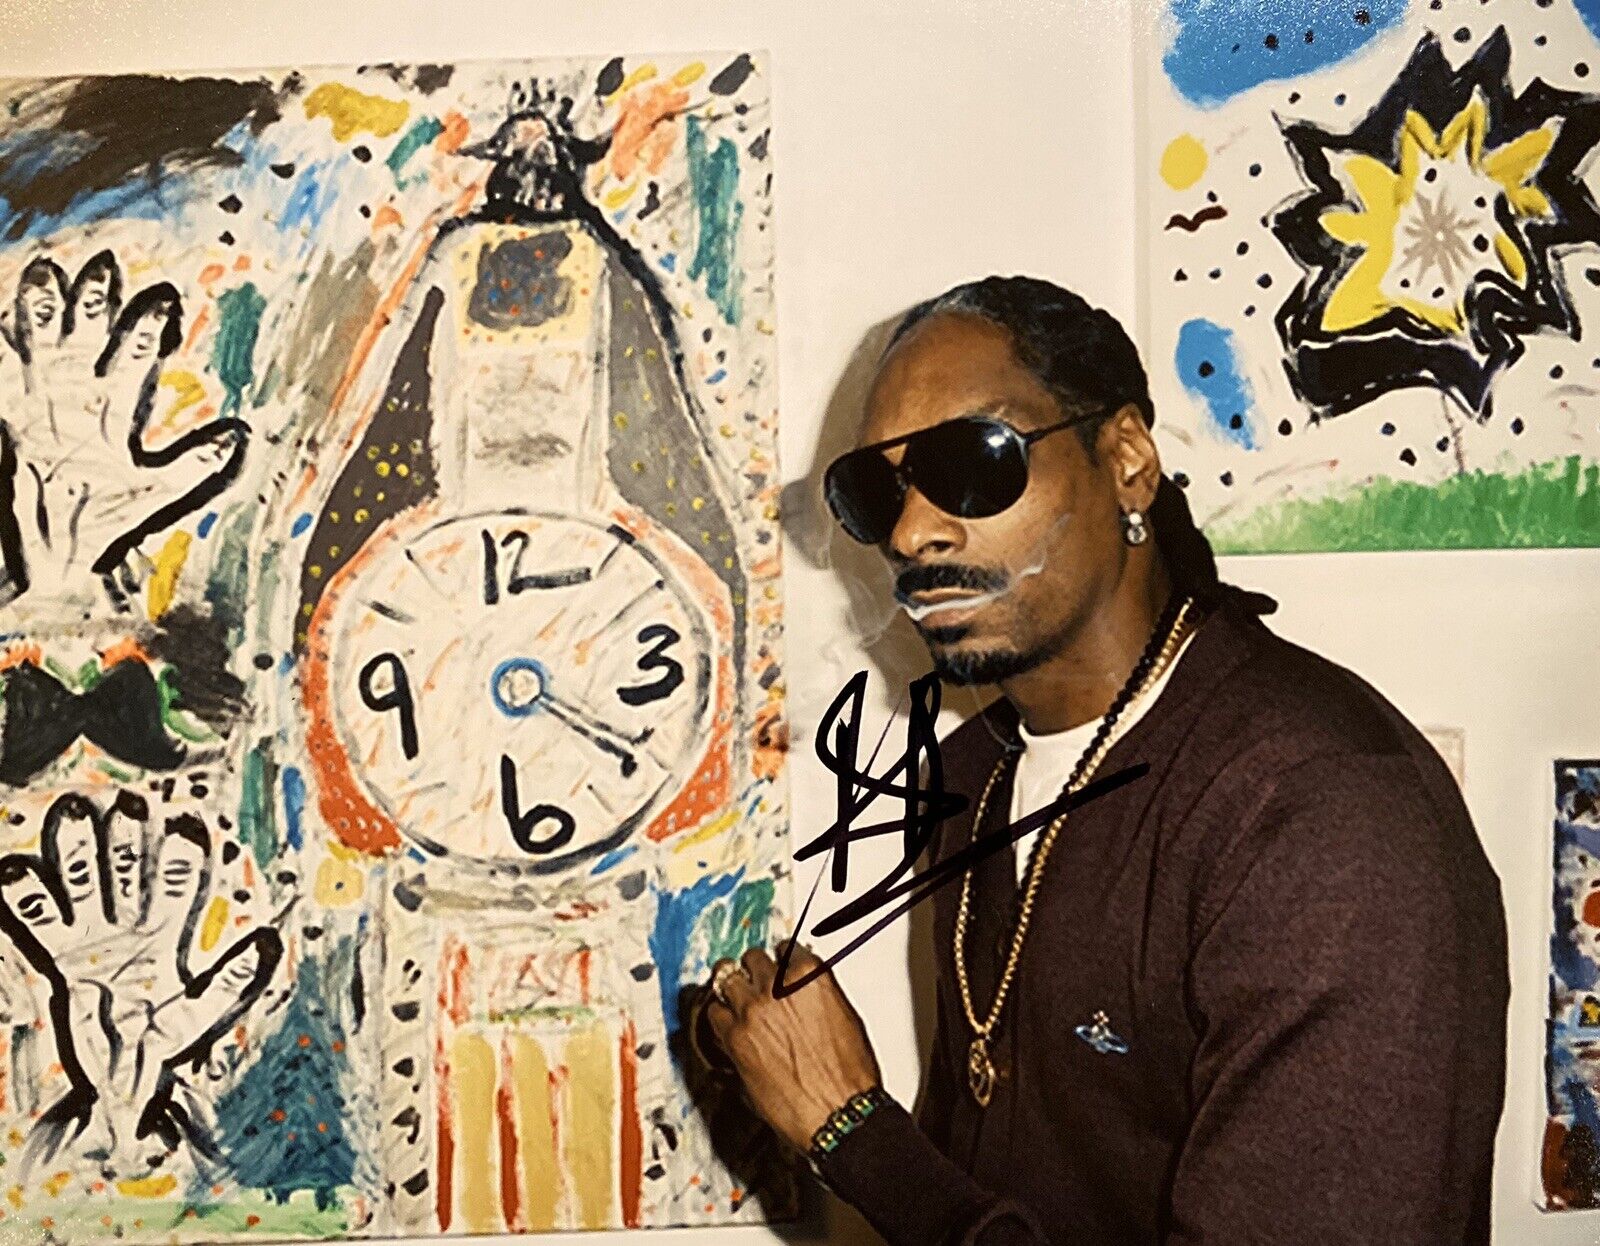 EXACT PROOF! SNOOP DOGG Signed Autographed 8x10 Photo Poster painting Doggystyle Smoking Weed